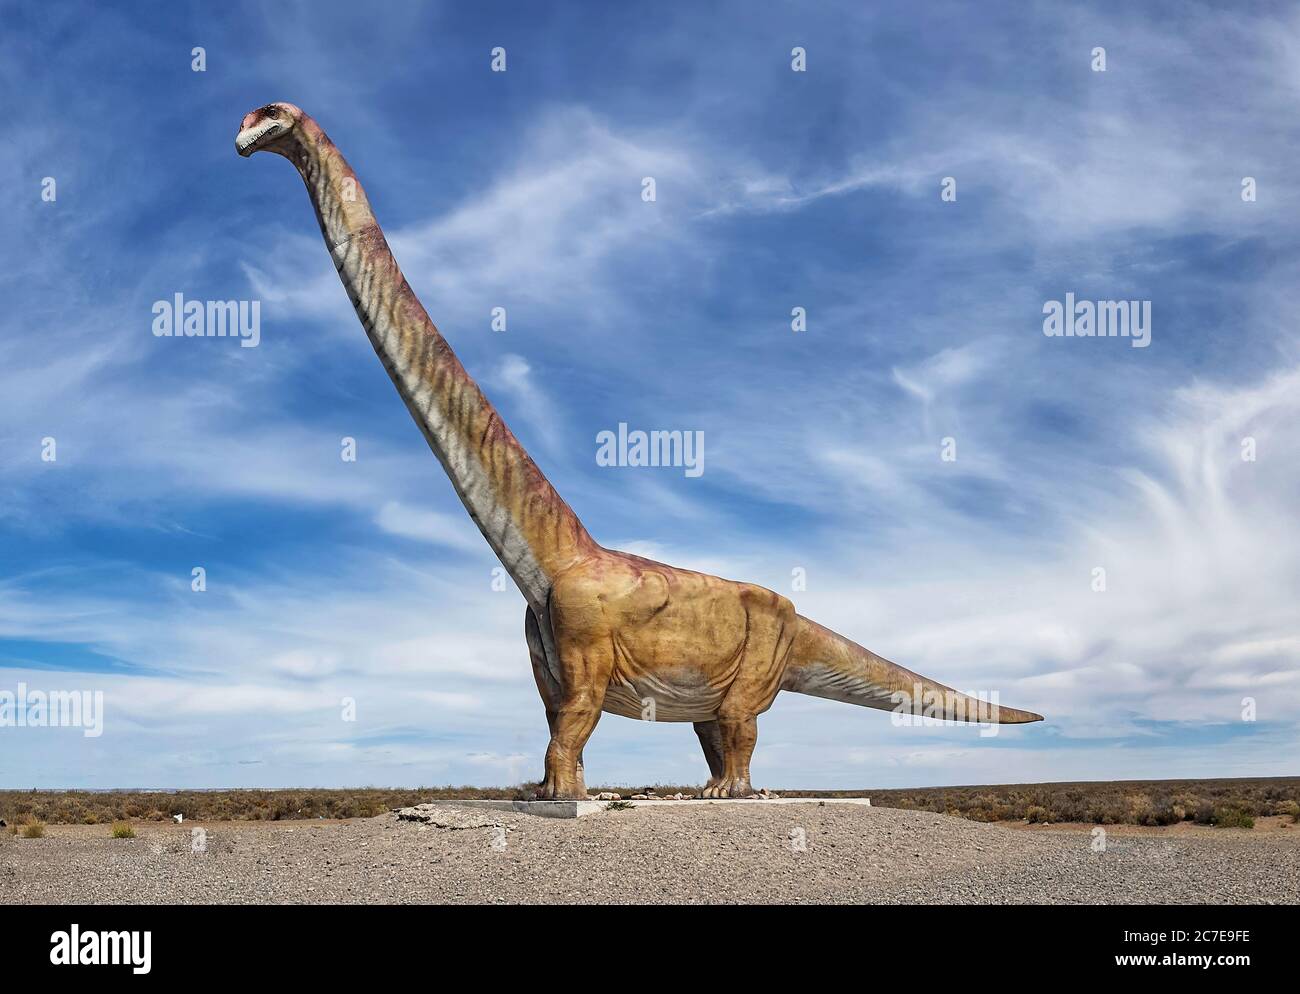 Public life size model of Patagotitan dinosaur by road in Argentina Stock Photo